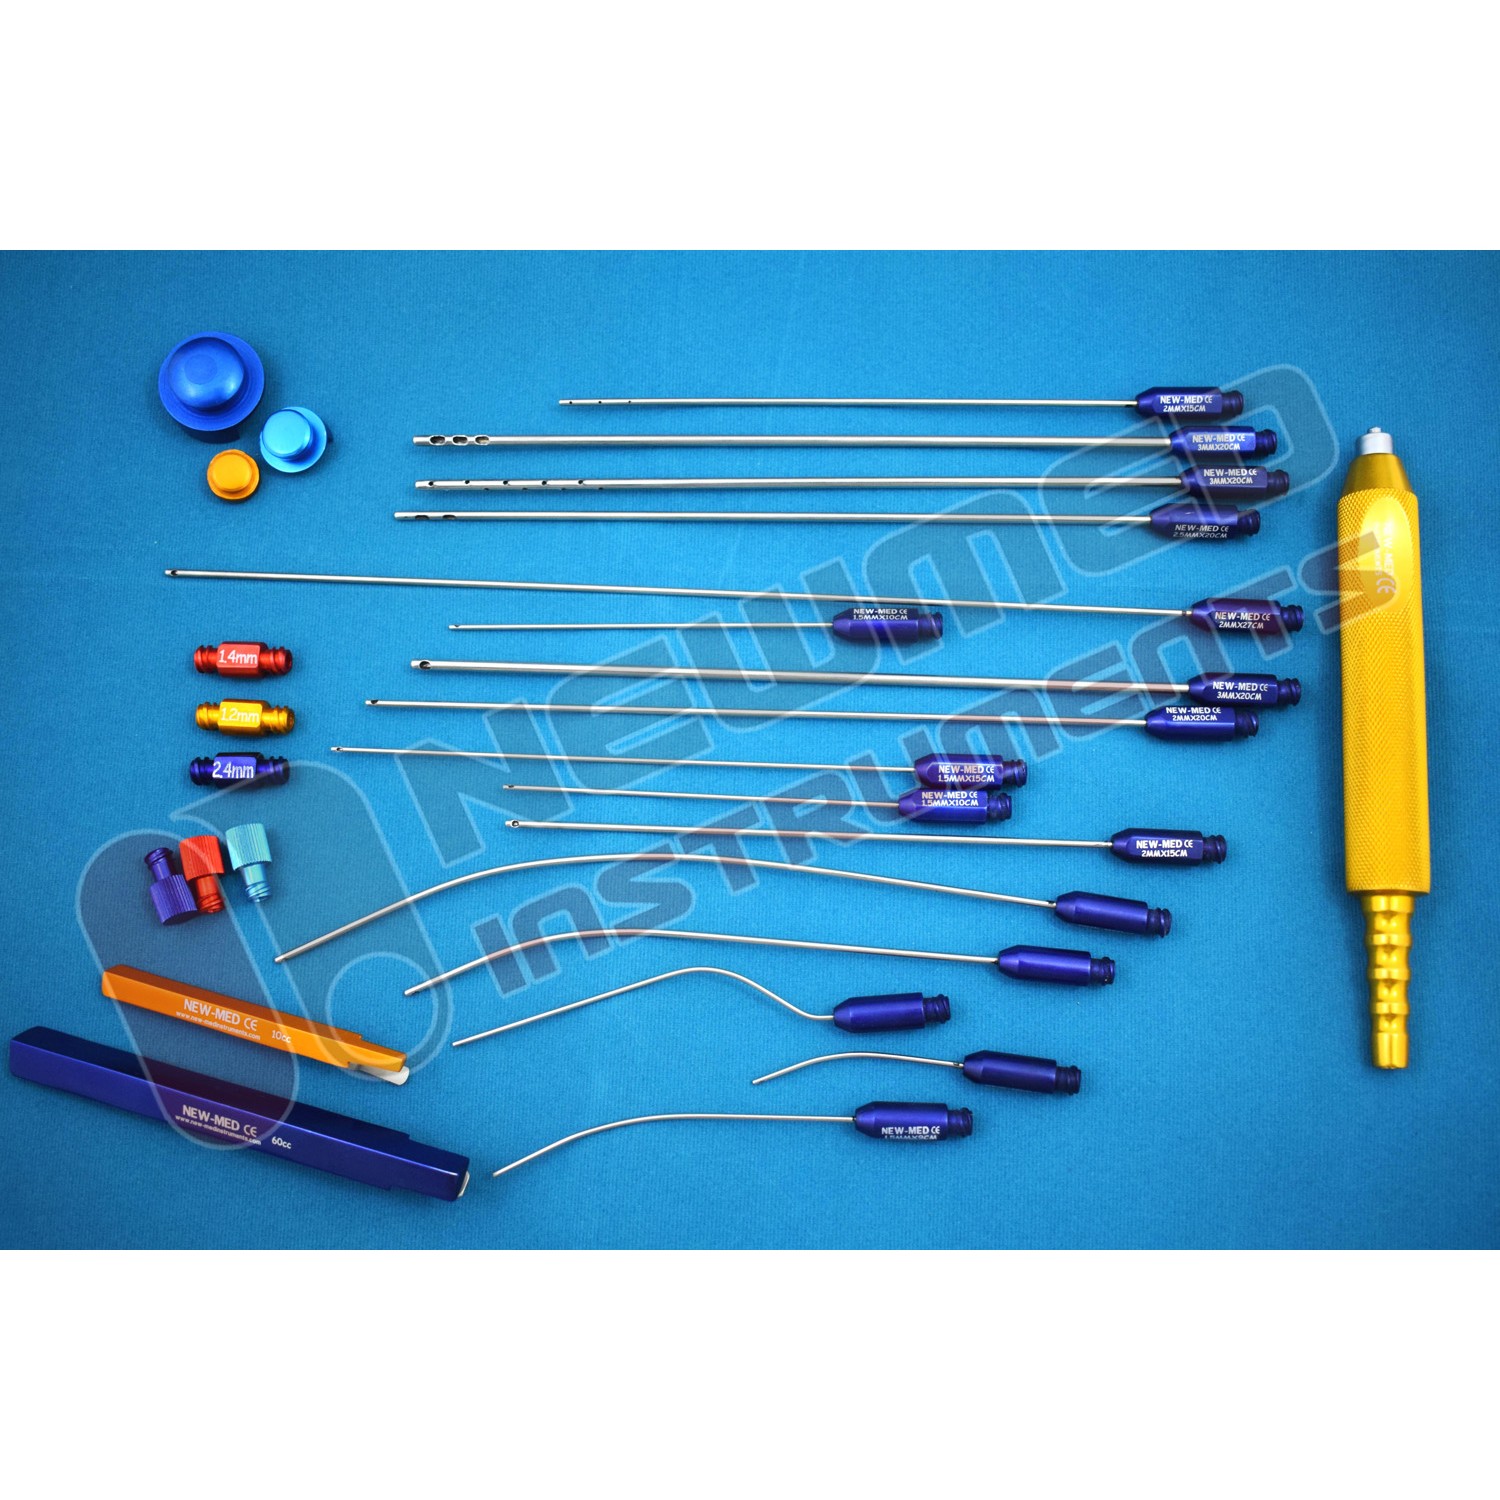 LipoBelt Cold Therapy  Inspired Surgical Supplies